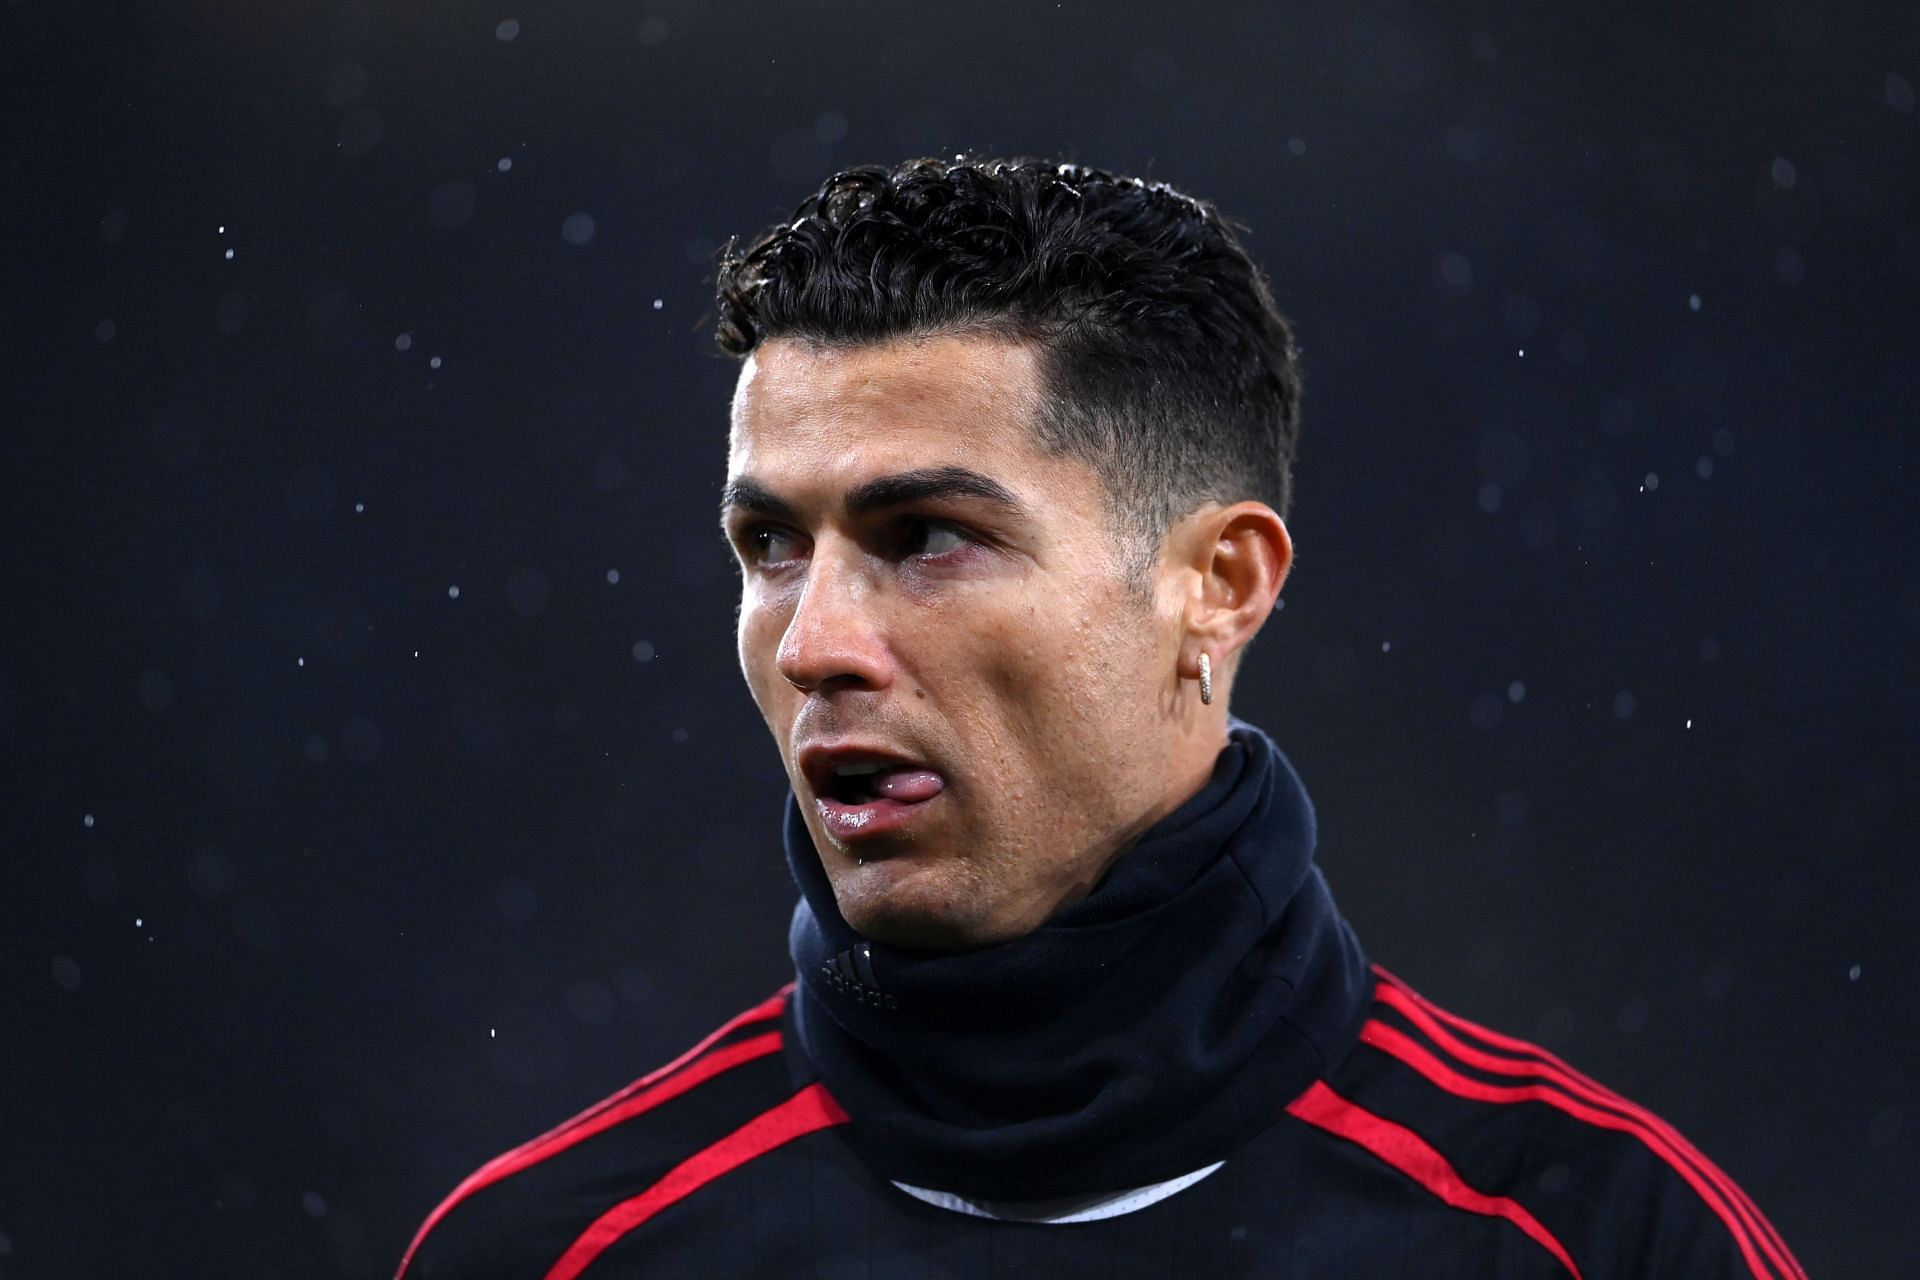 Ronaldo will be playing against Brentford. (Photo by Laurence Griffiths/Getty Images)